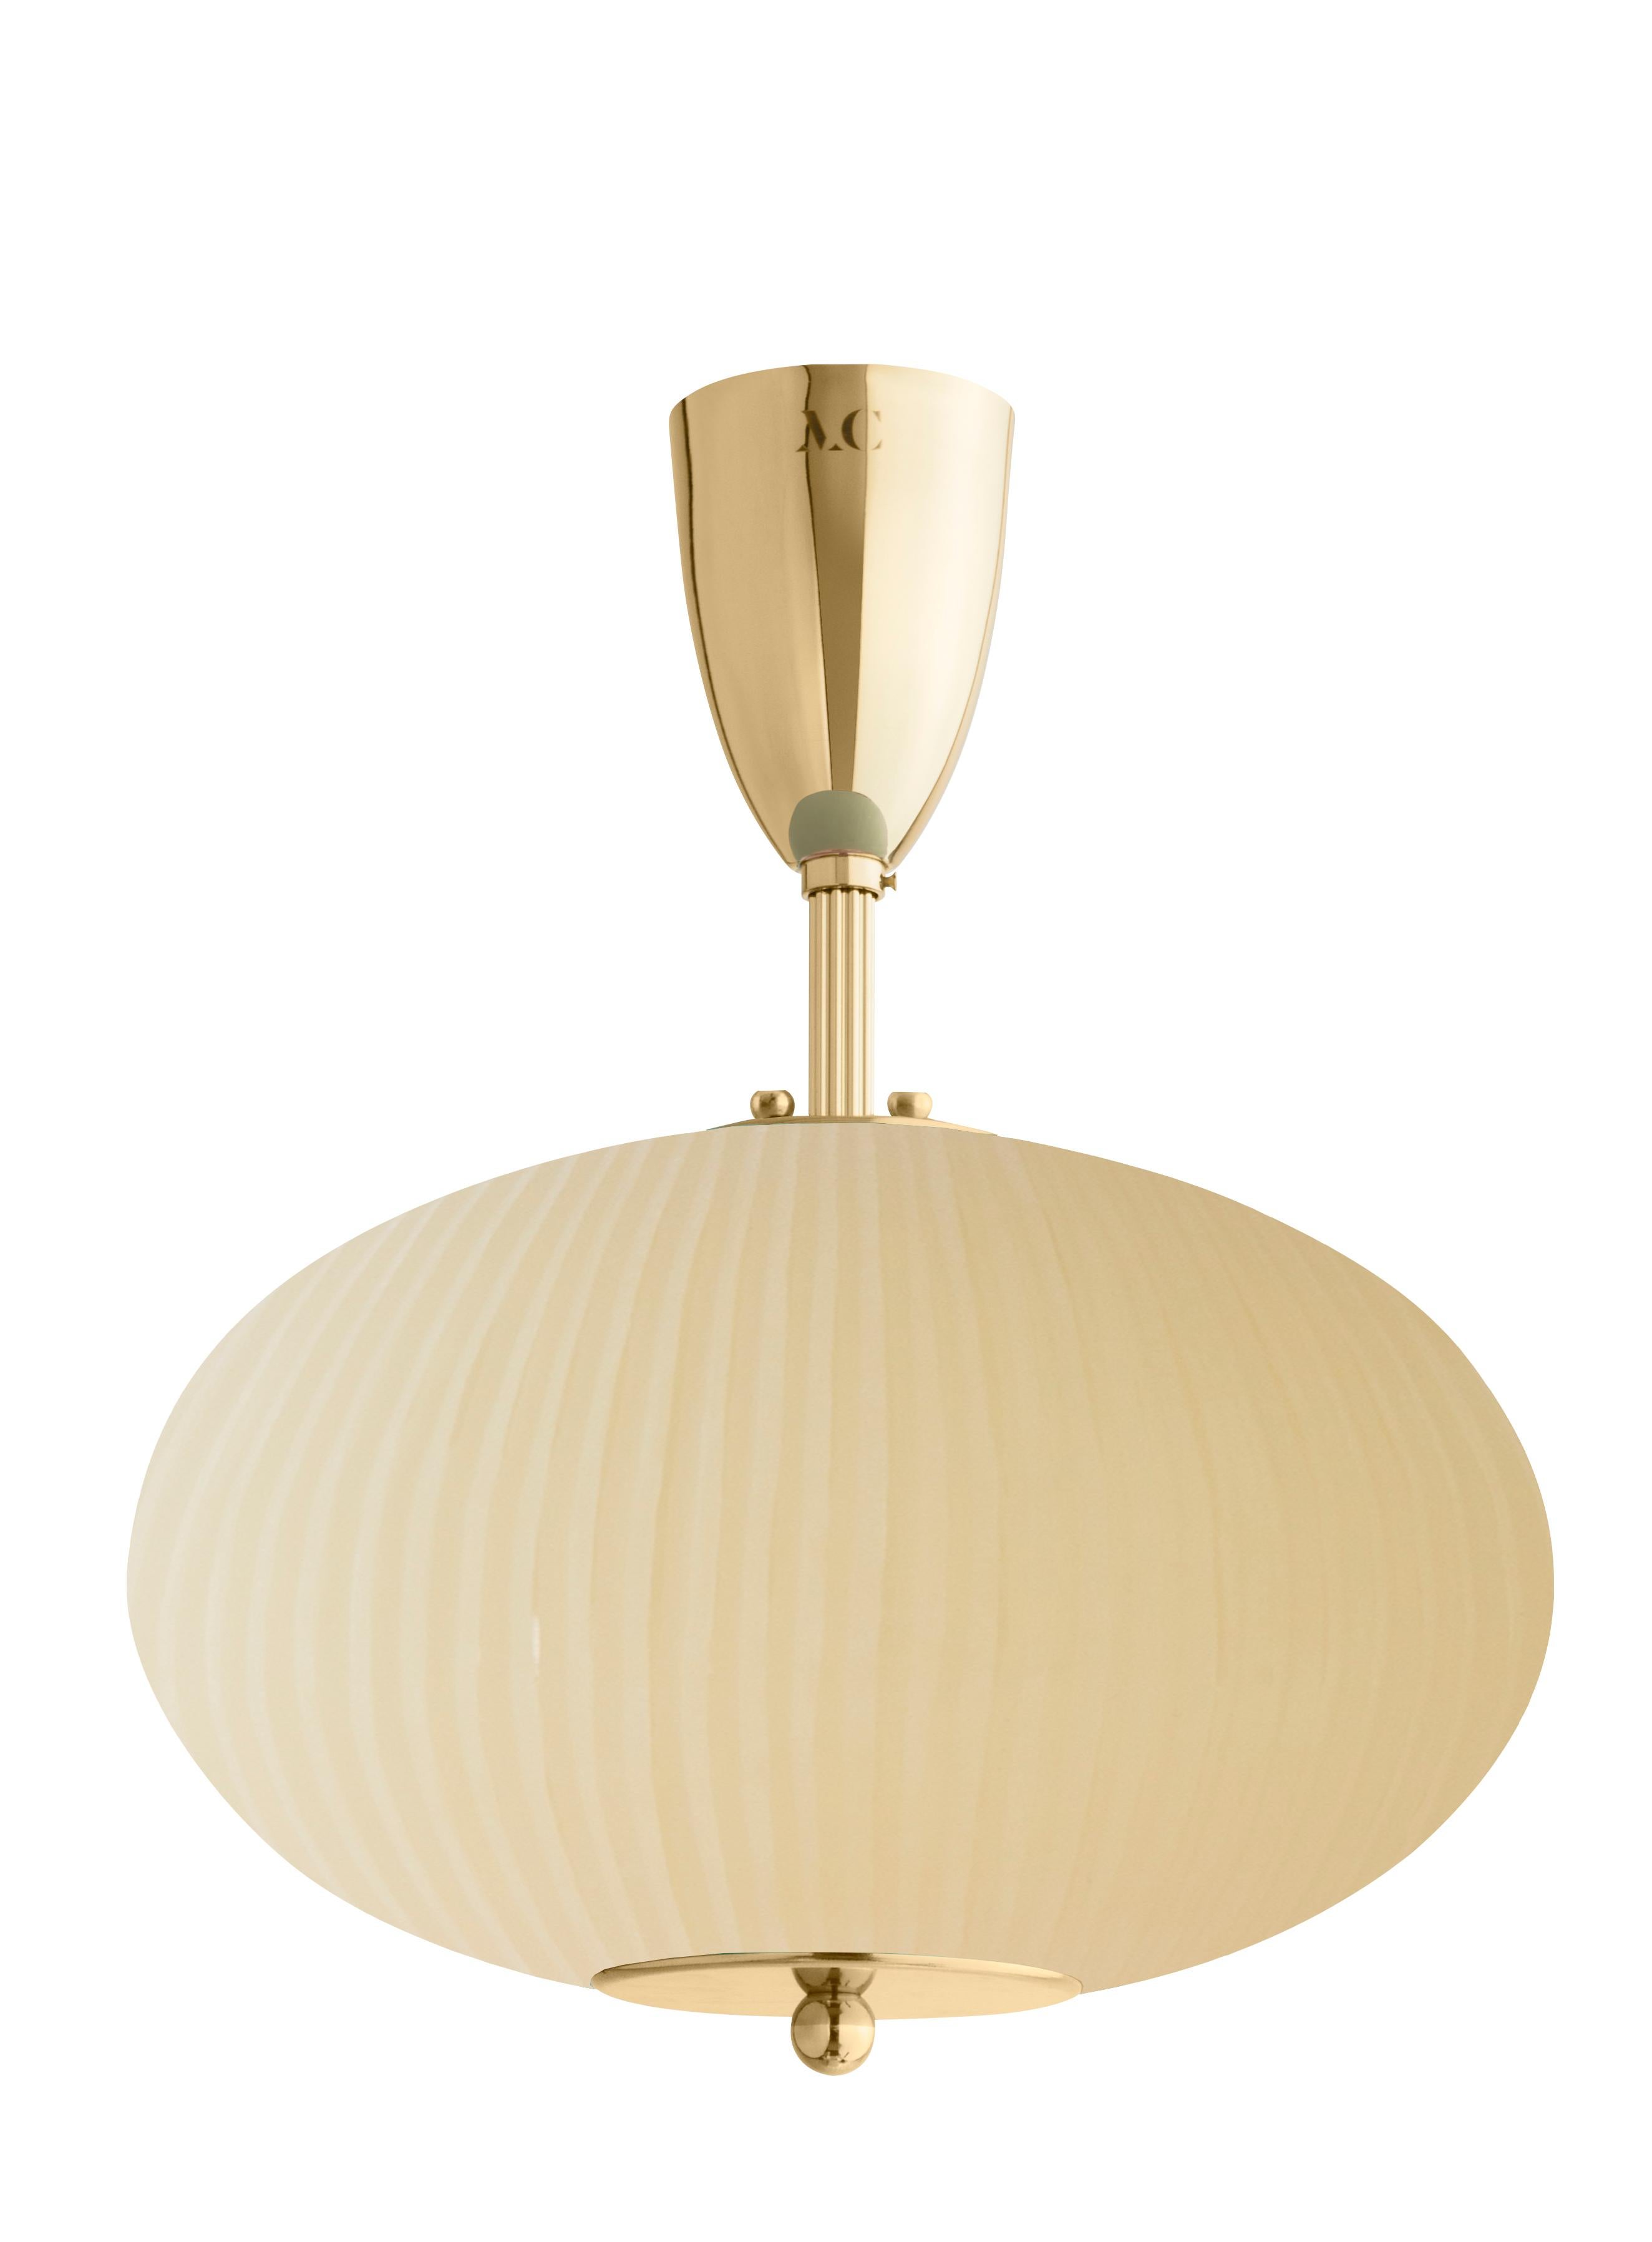 Ceiling lamp China 07 by Magic Circus Editions
Dimensions: H 40 x W 32 x D 32 cm
Materials: Brass, mouth blown glass sculpted with a diamond saw
Colour: mustard yellow

Available finishes: Brass, nickel
Available colours: enamel soft white,